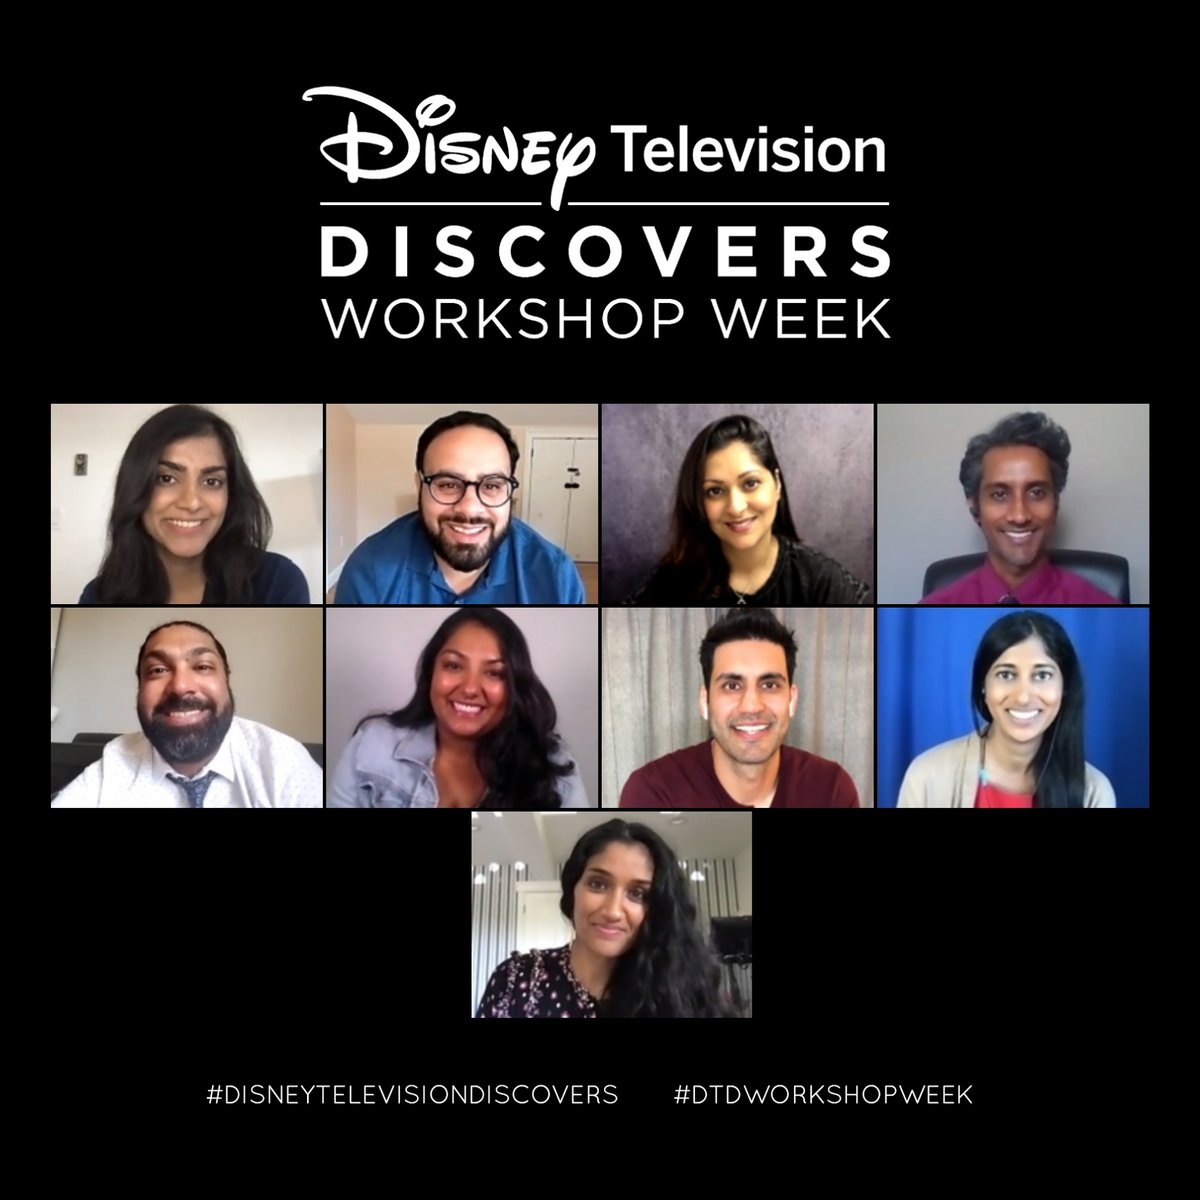 Our 2021 Disney Television Discovers: Workshop Week in Los Angeles continues with actors of SAMMA (South Asians in Media, Marketing and Entertainment Association). Thanks for joining remotely! #DisneyTelevisionDiscovers #DTDWorkshopWeek